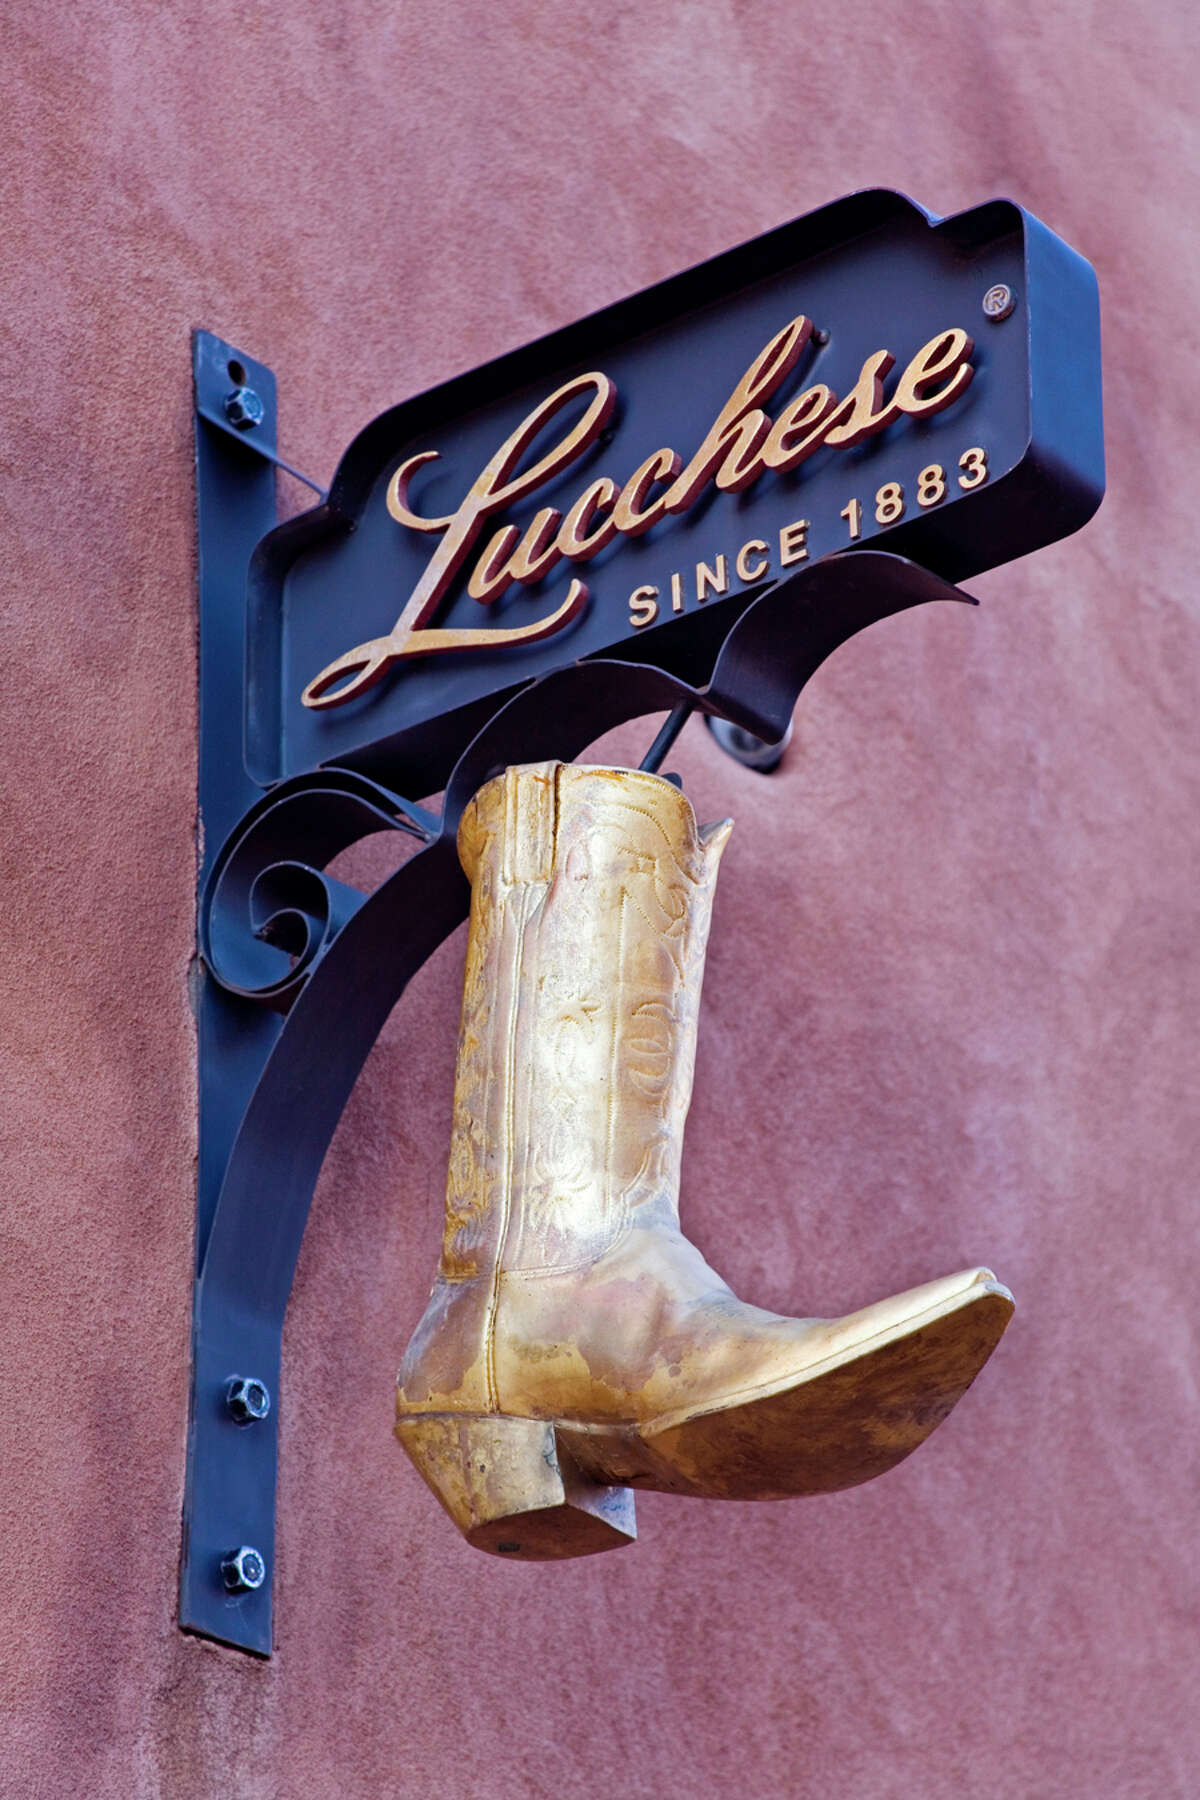 In the beginning... The company was founded in San Antonio 1883 by Salvatore Lucchese and his brother Joseph. 